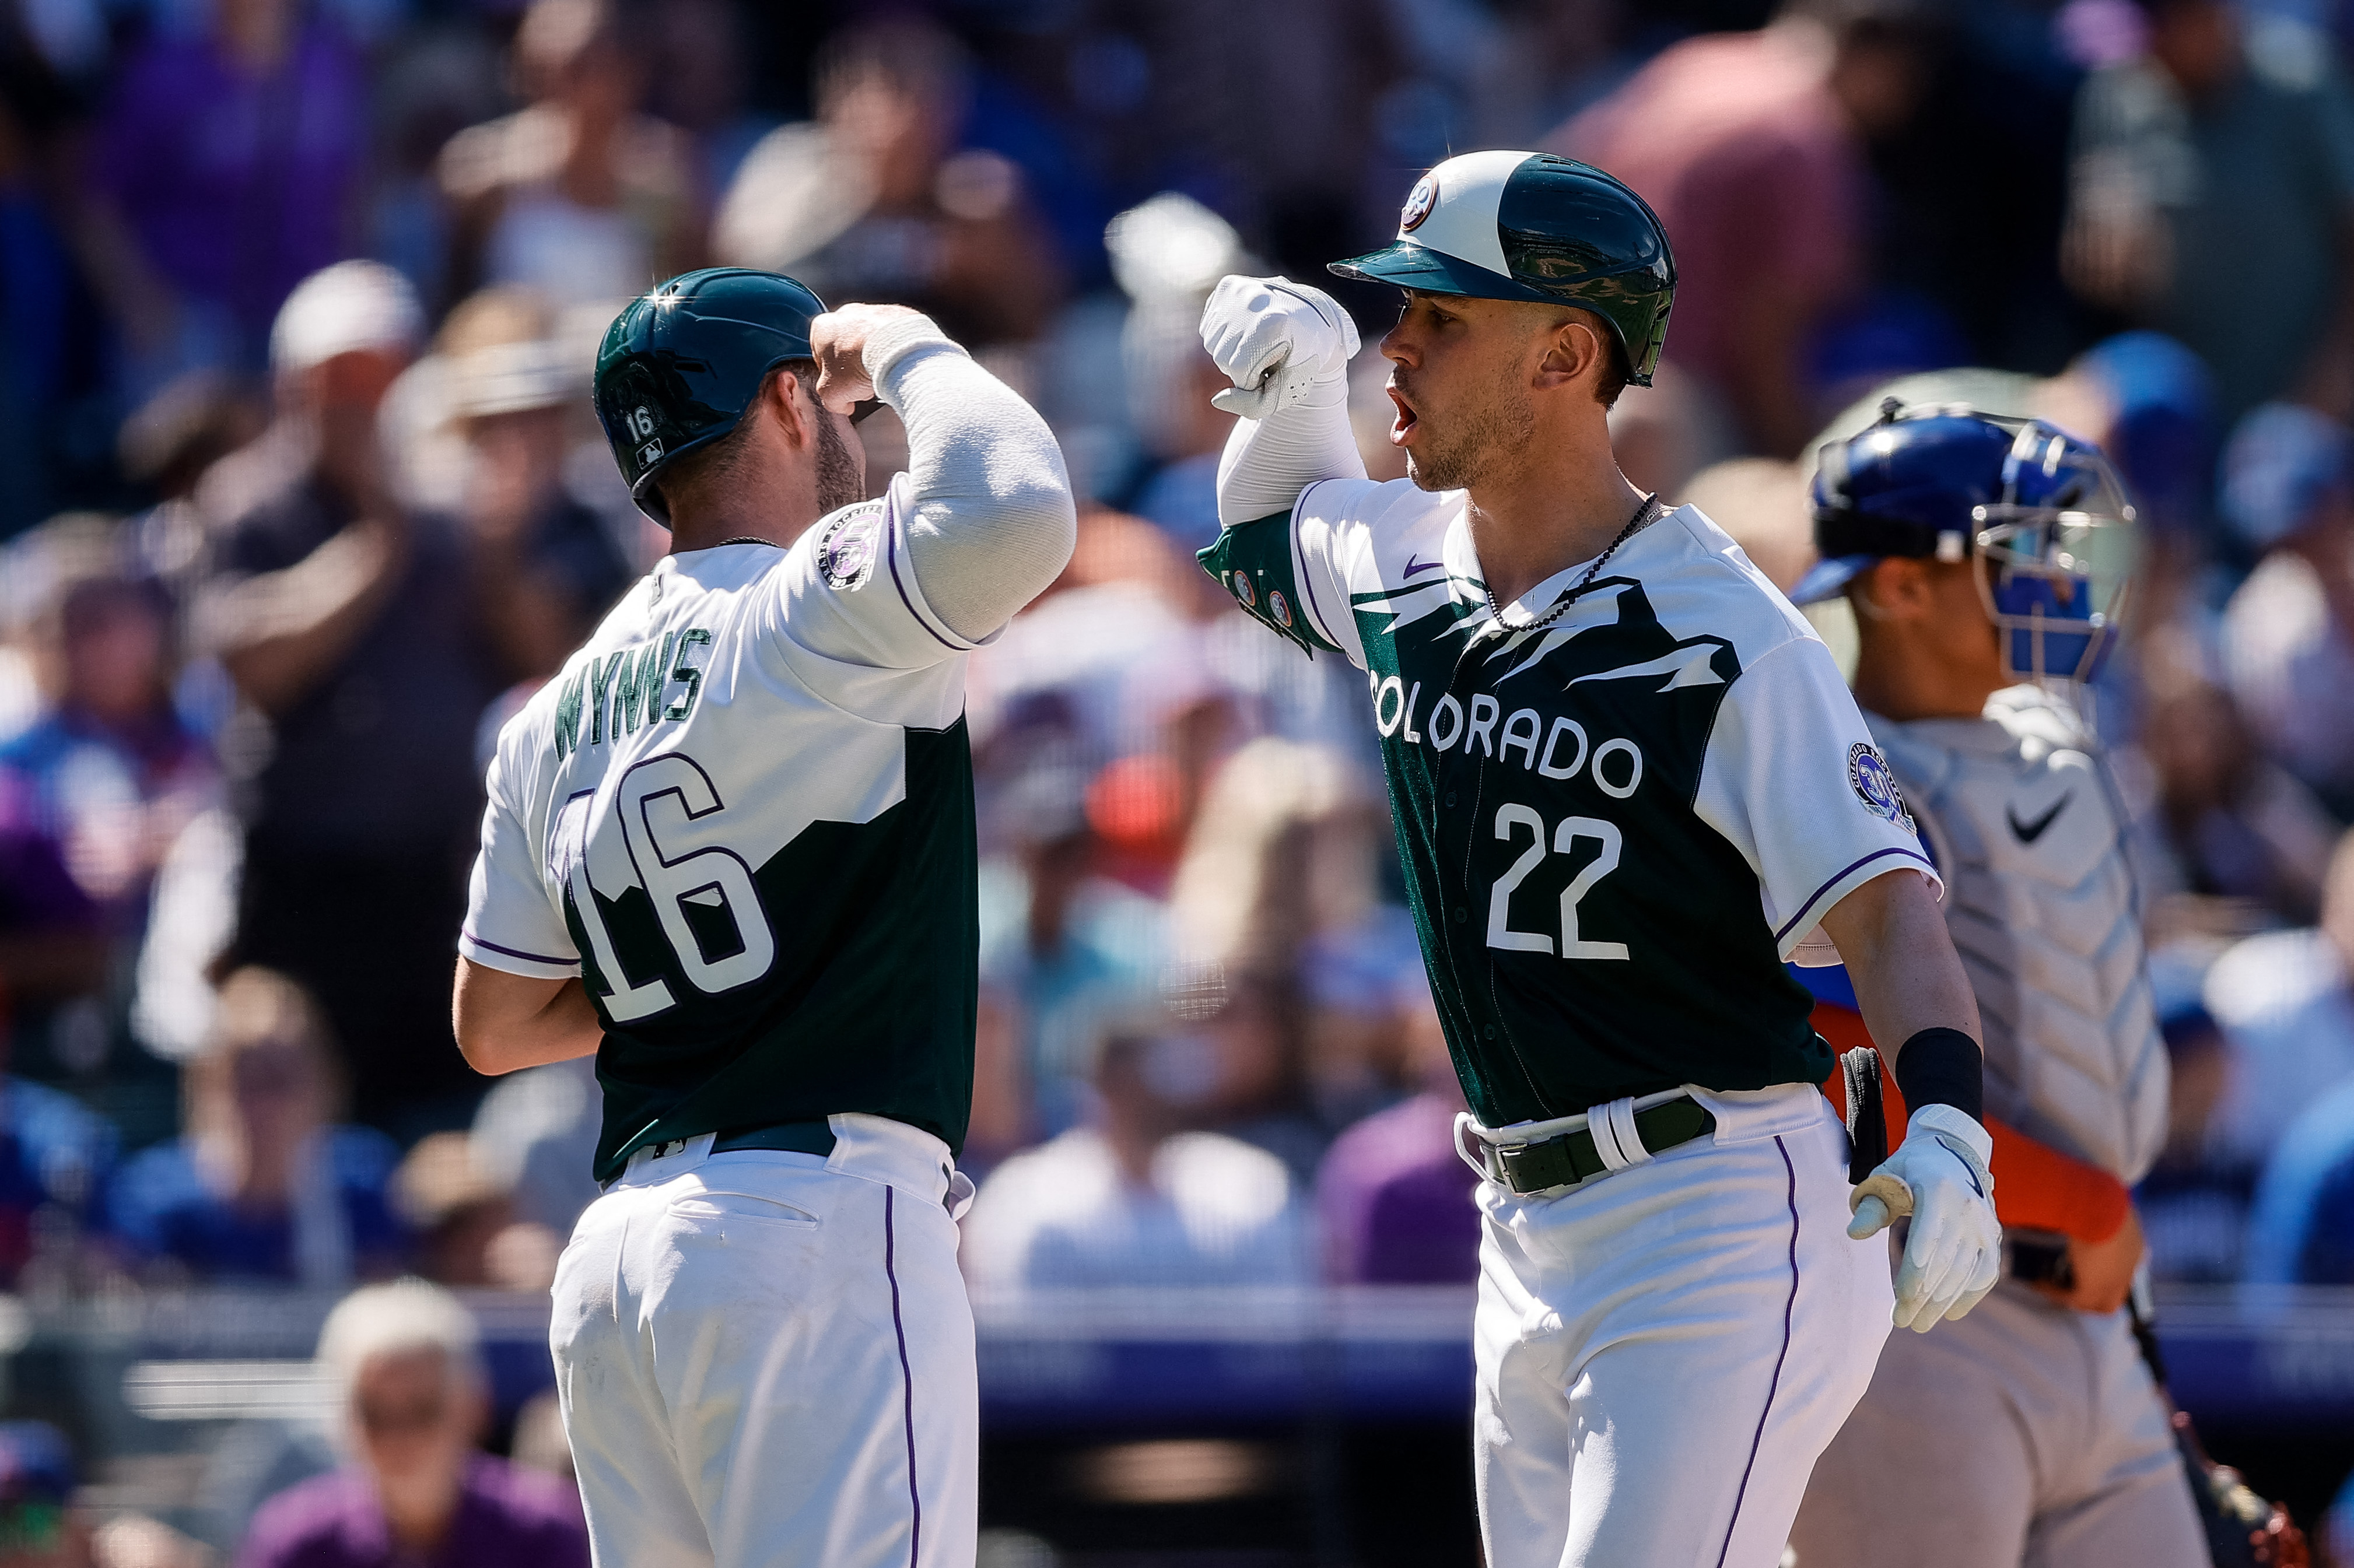 Four homers rally Rockies past Cubs, 7-3